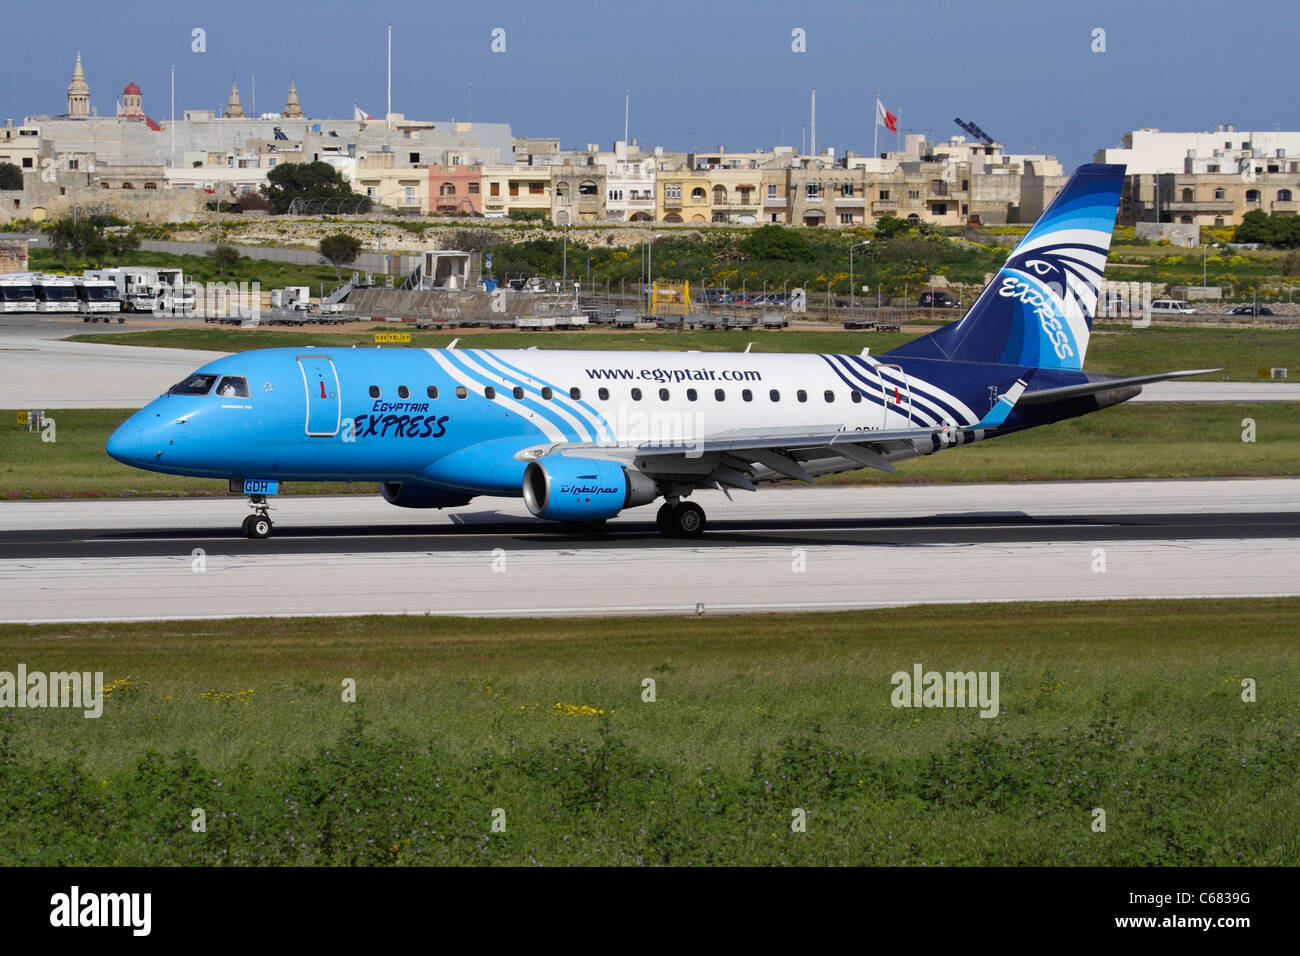 EgyptAir Express Embraer 170 small passenger jet airliner on the runway while departing from Malta Stock Photo